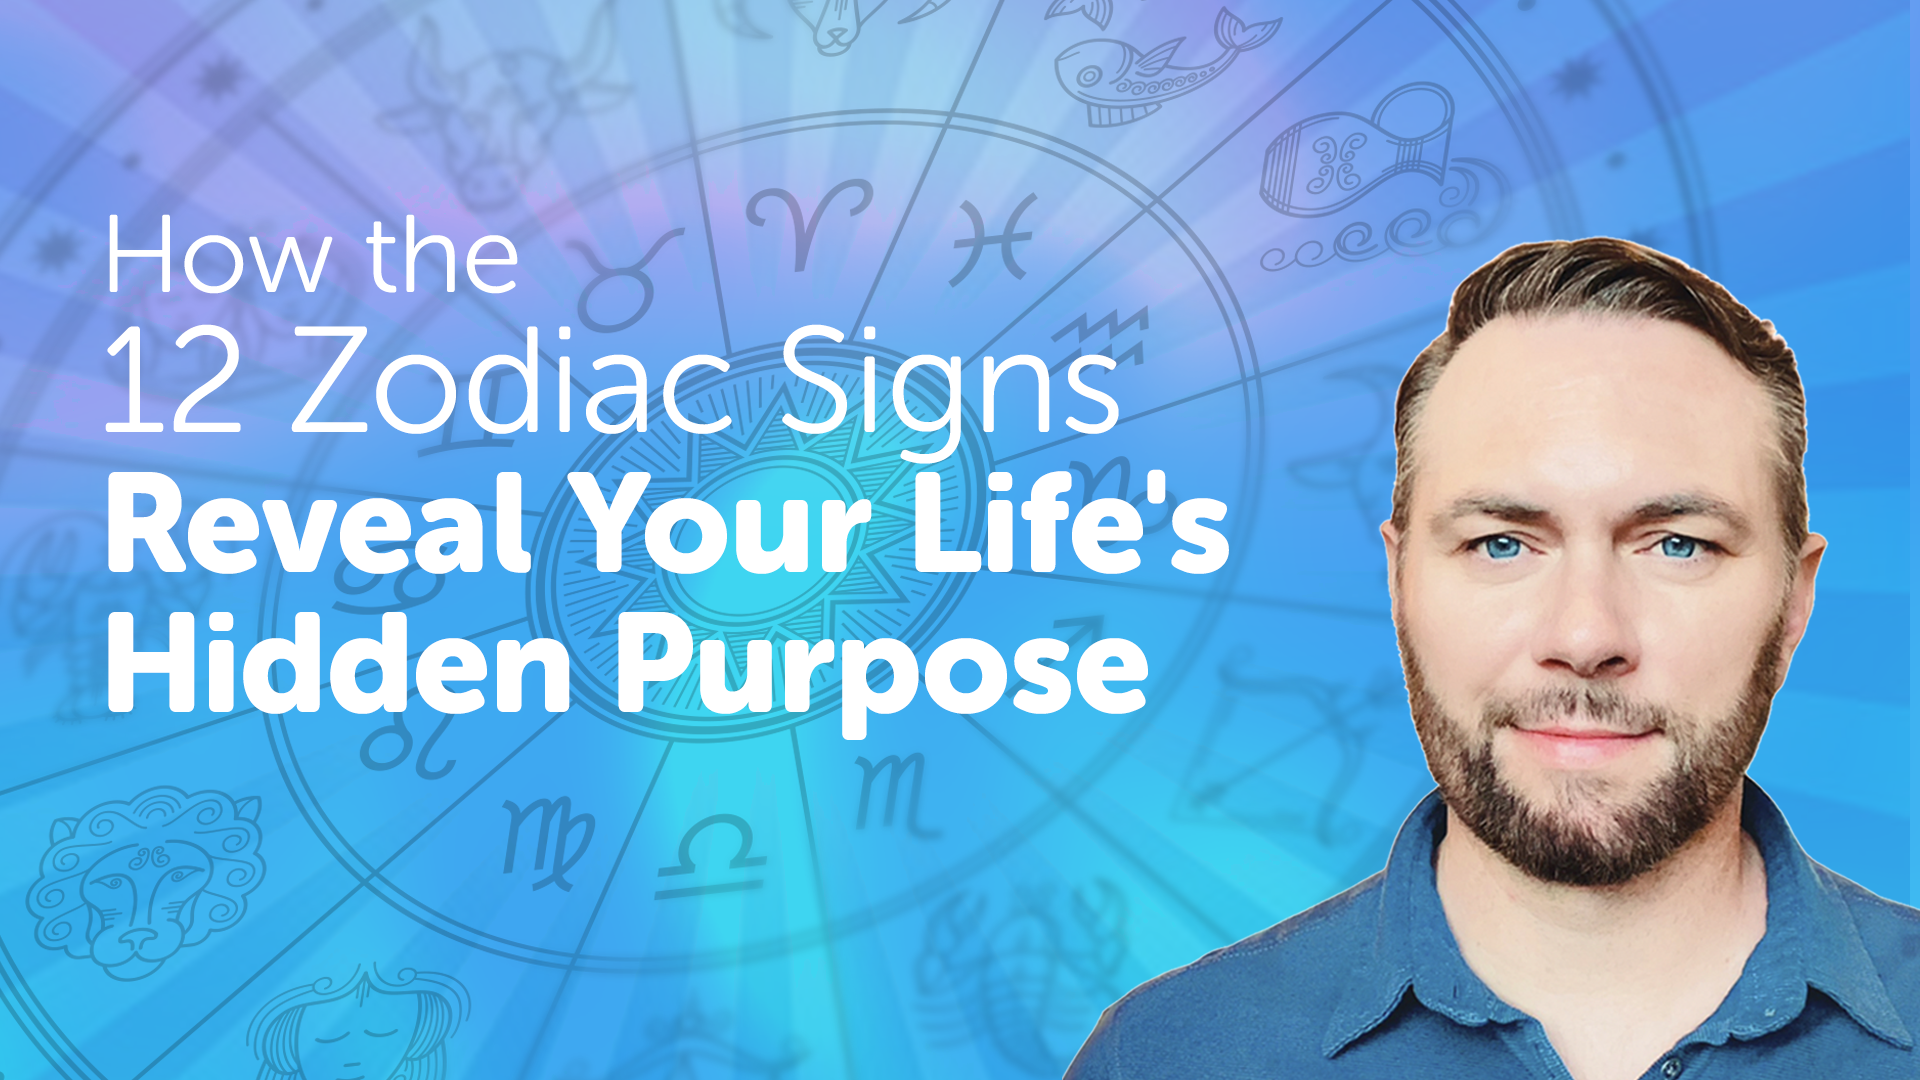 Video – How the 12 Zodiac Signs Reveal Your Life’s Hidden Purpose